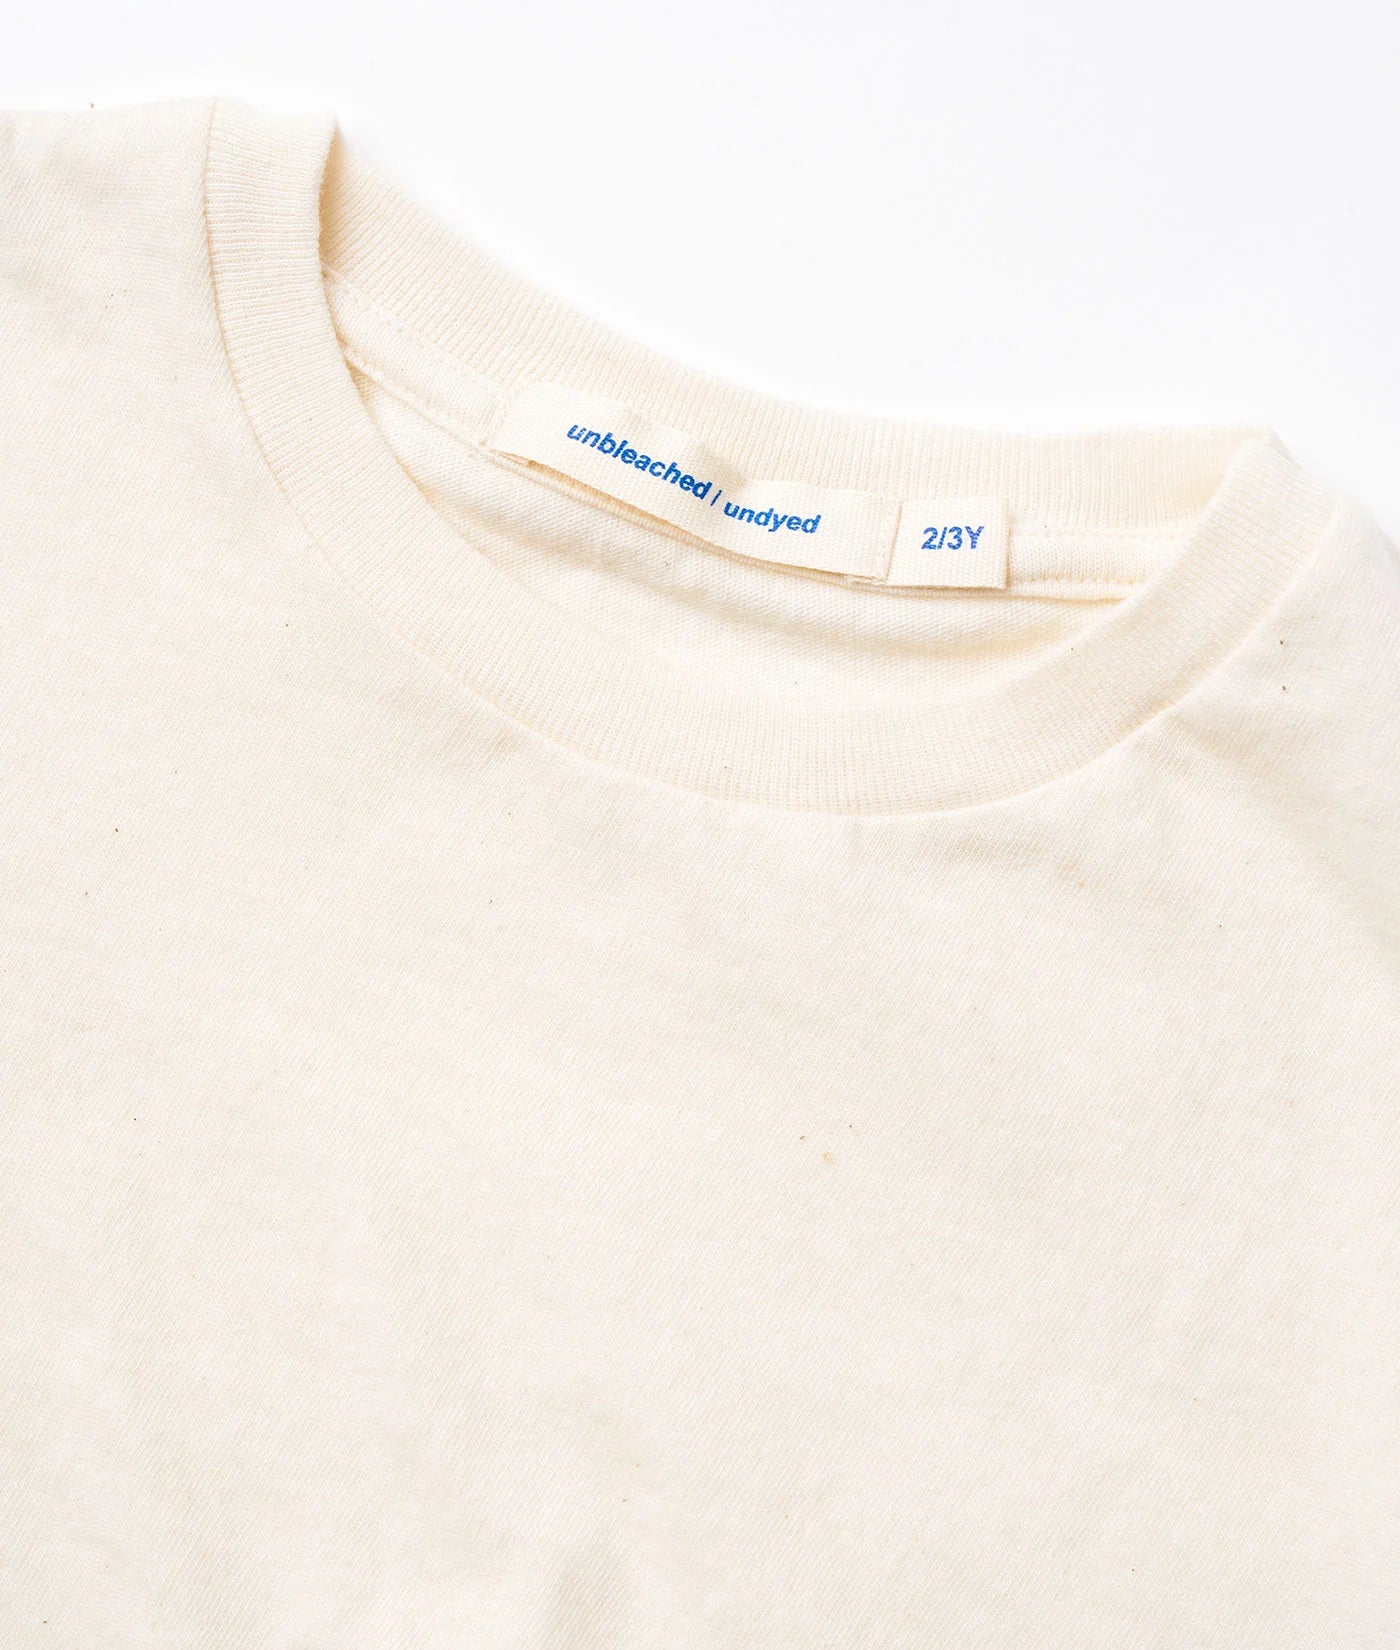 Industry of All Nations Kids Clean T-Shirt, Undyed